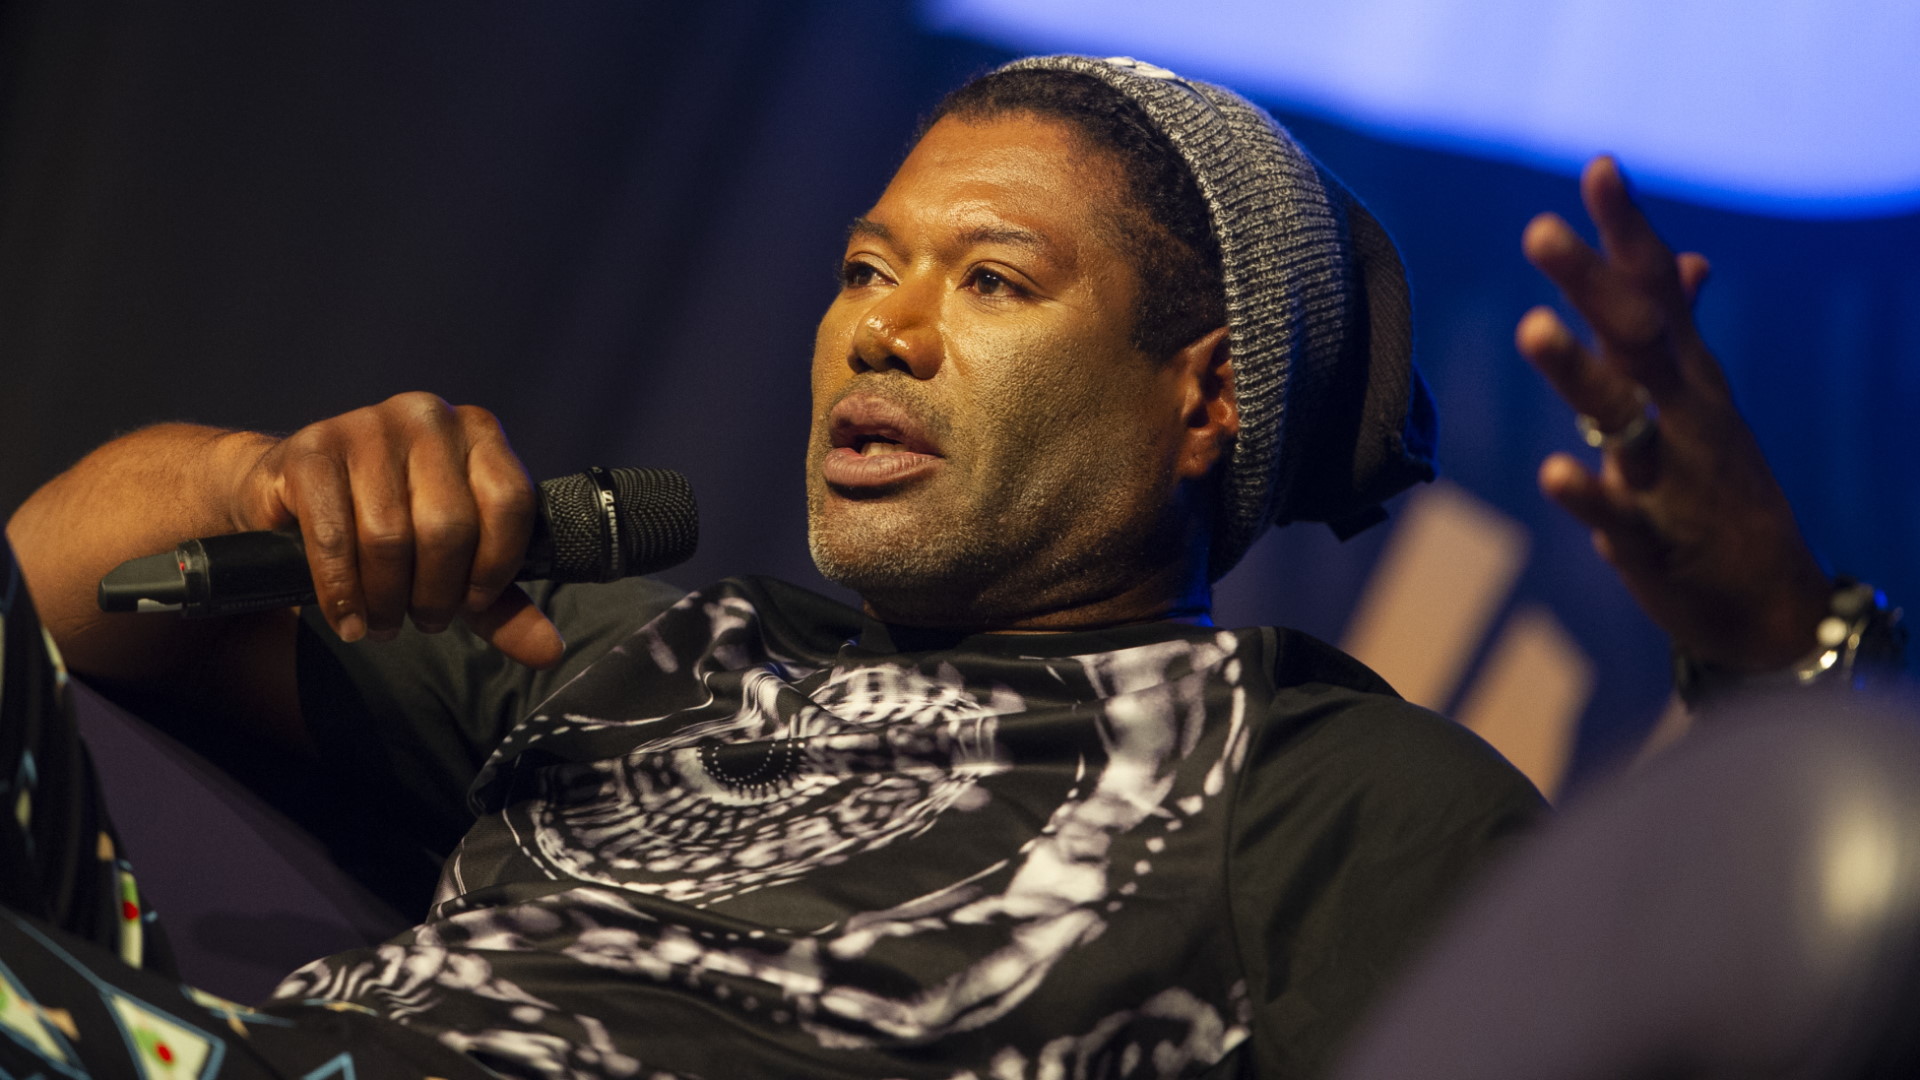  God of War actor Christopher Judge will voice Black Panther in Marvel's Avengers 